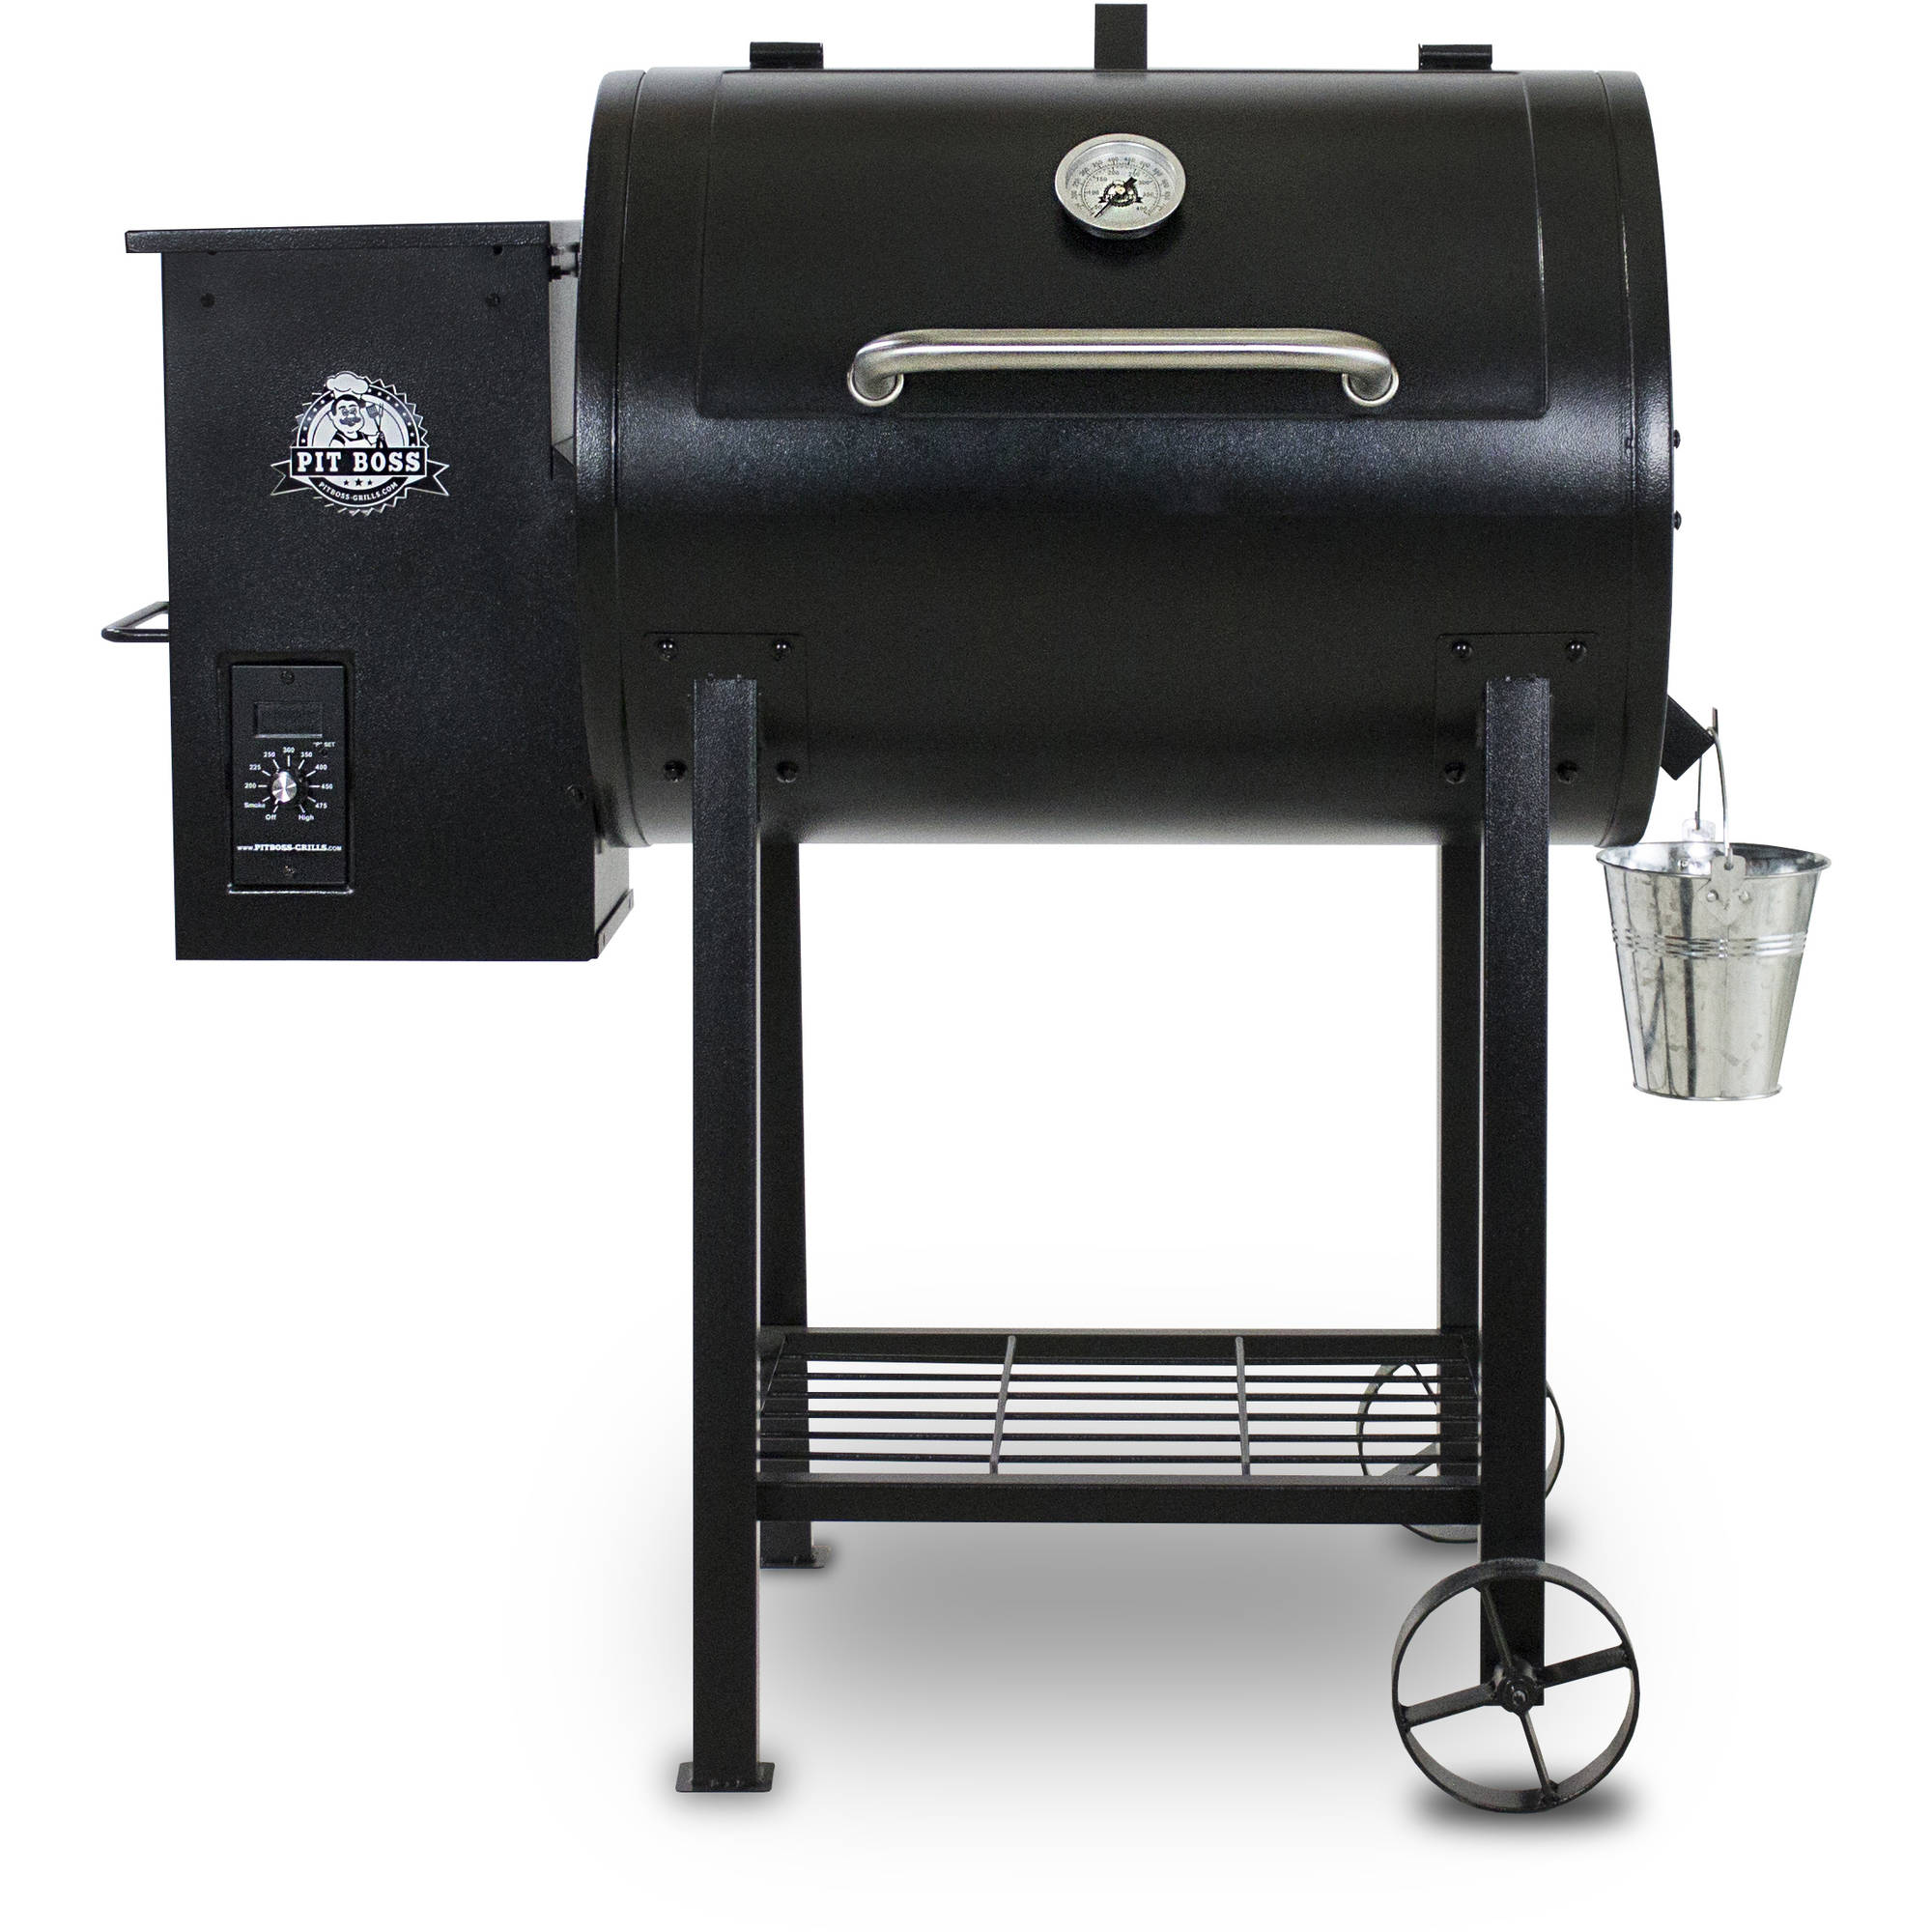 Pit Boss 700FB Wood Fired Pellet Grill with Flame Broiler, 700 Sq. In. Cooking Space - image 1 of 11